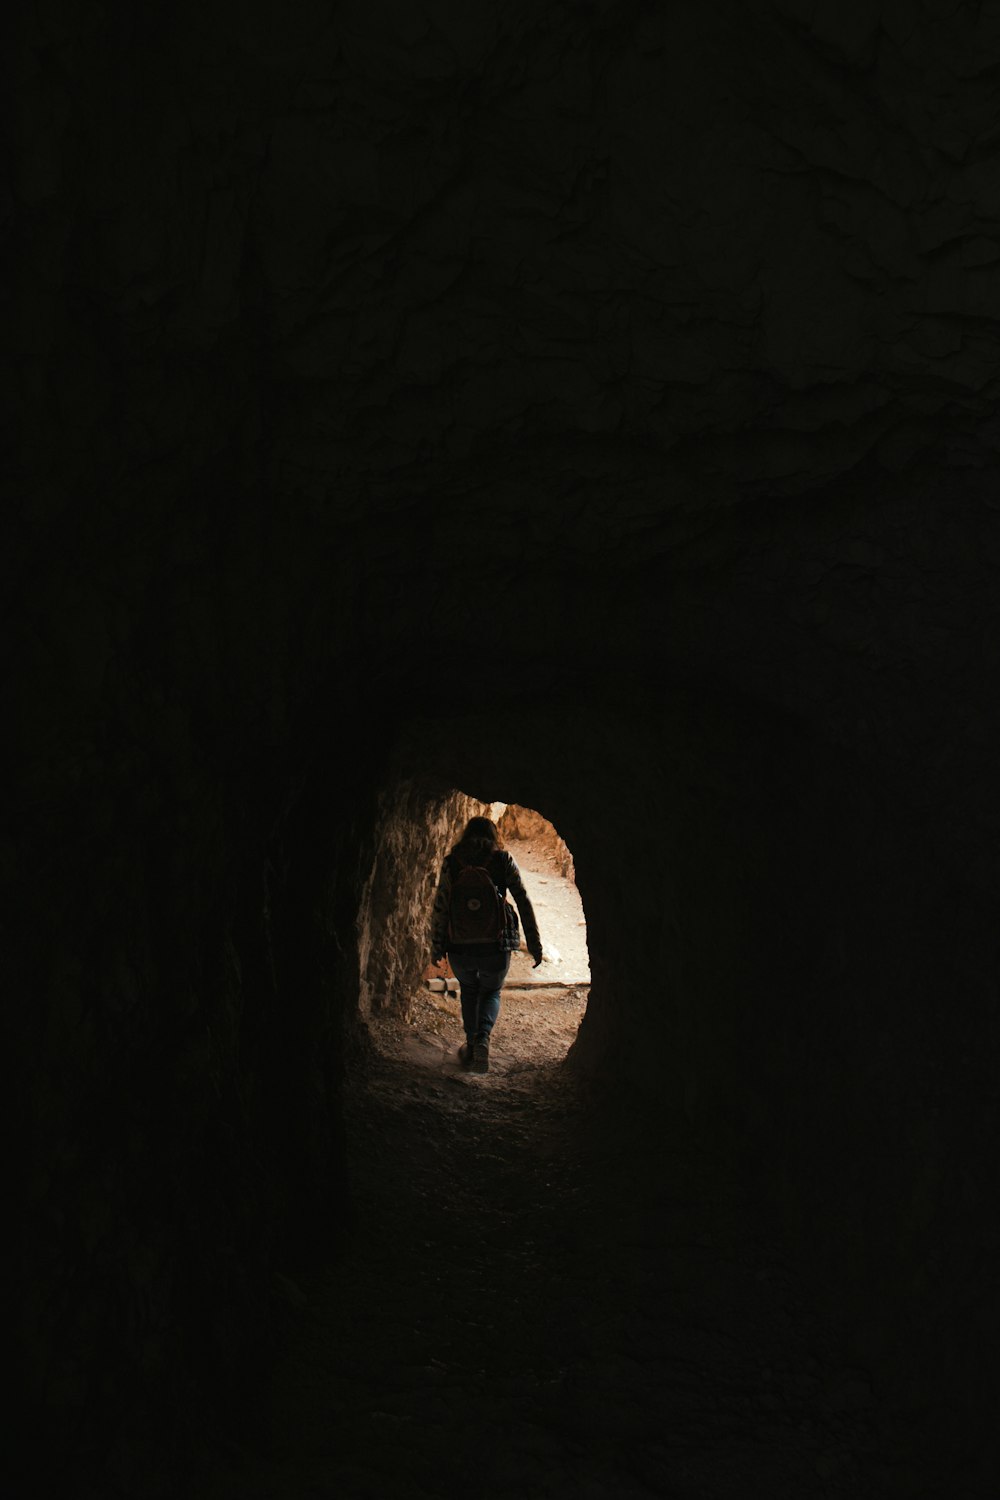 a person walking out of a dark tunnel